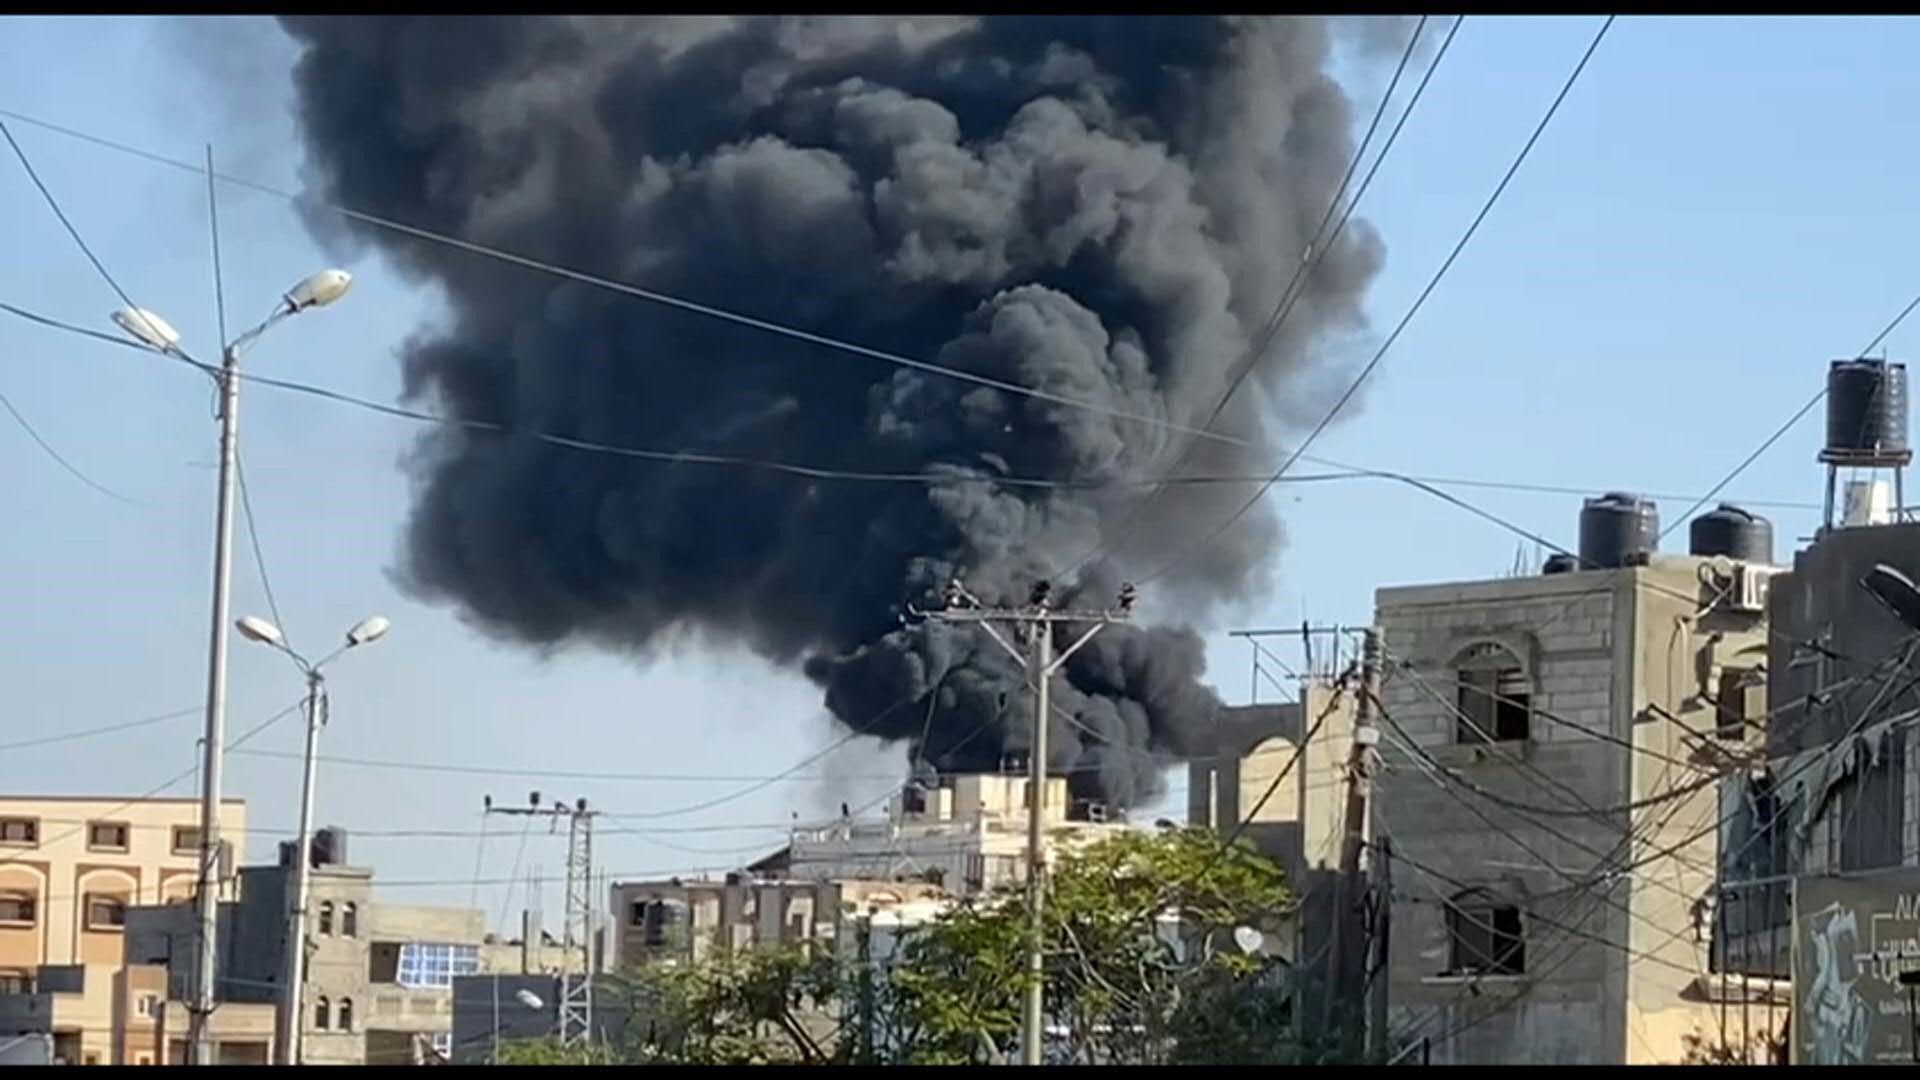 Smoke rises, gunfire rings out in Rafah deserted streets